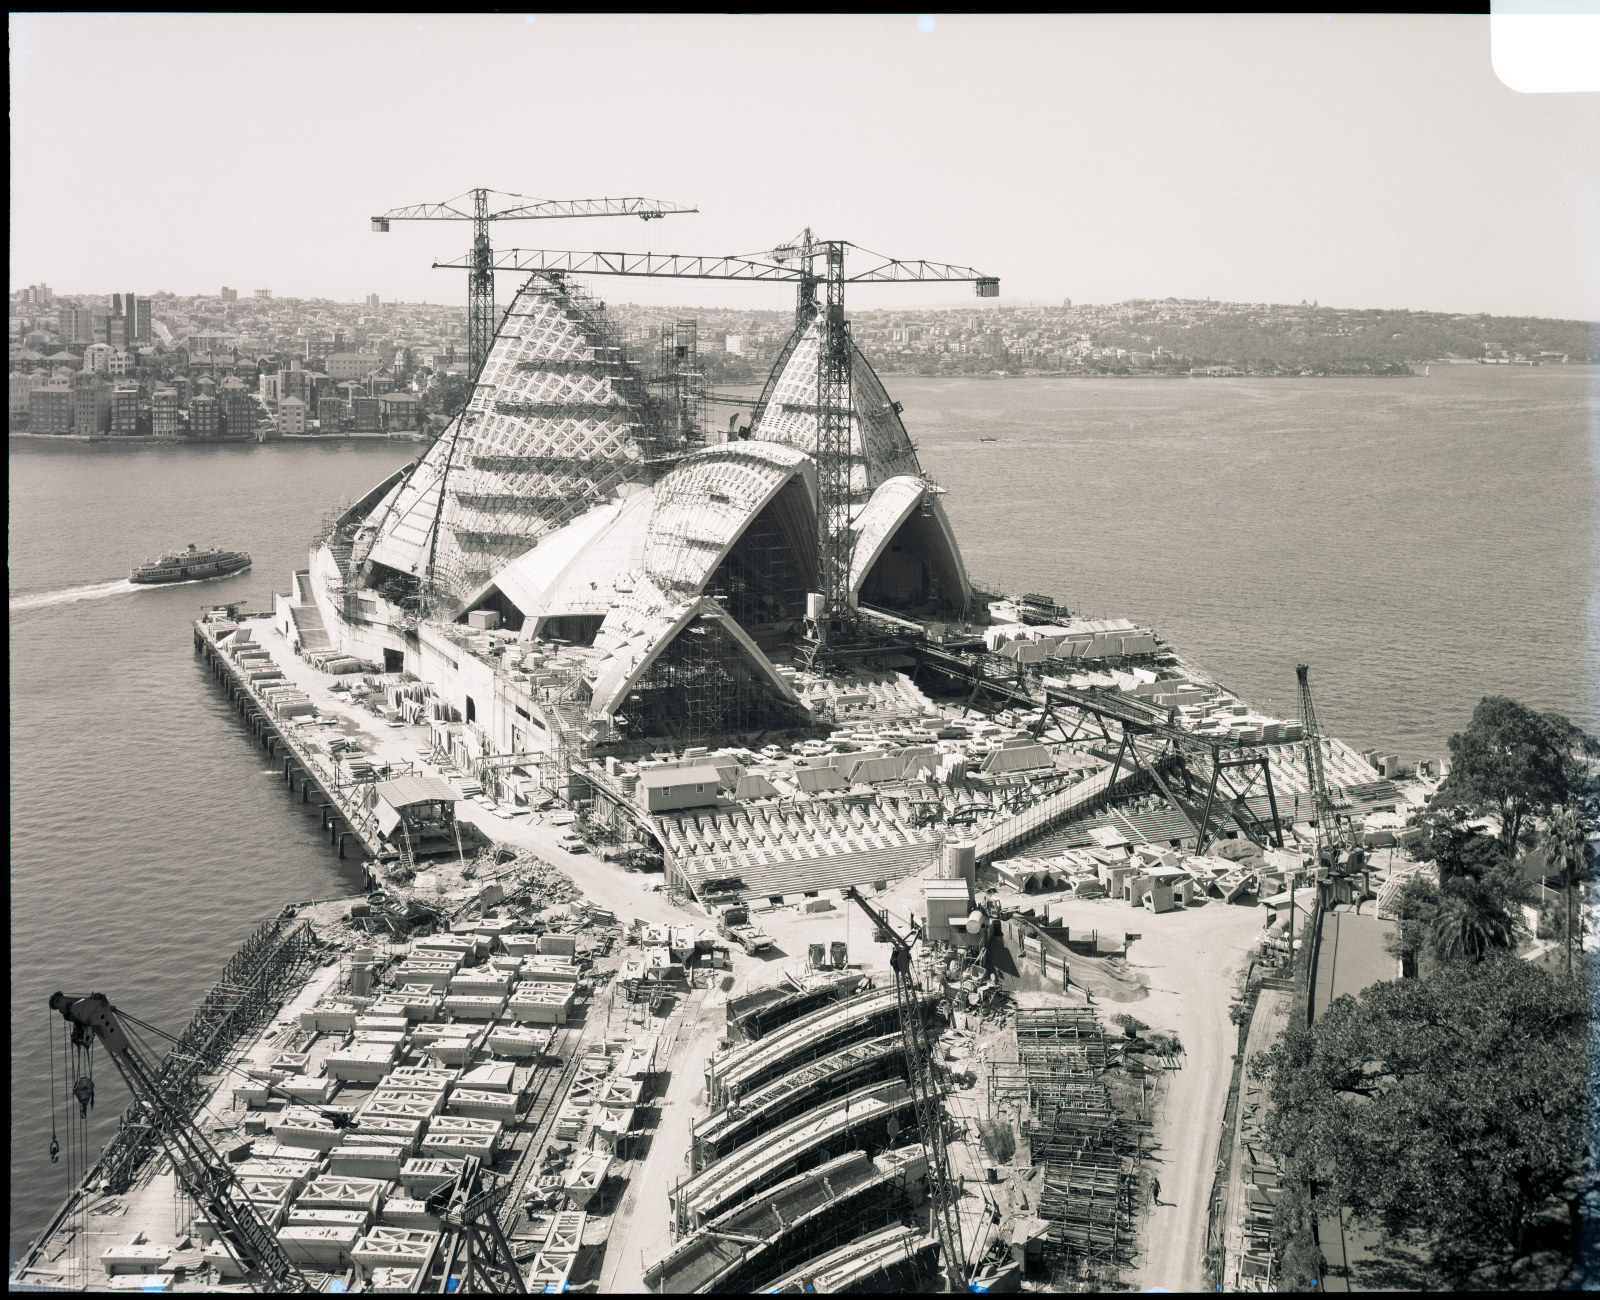 Government Printing Office 2 - 29953 - Opera House from Unilever Building [Sydney Opera House (N.S.W.); building construction] [GPO original locations or series - unnumbered] [4/03/1966]